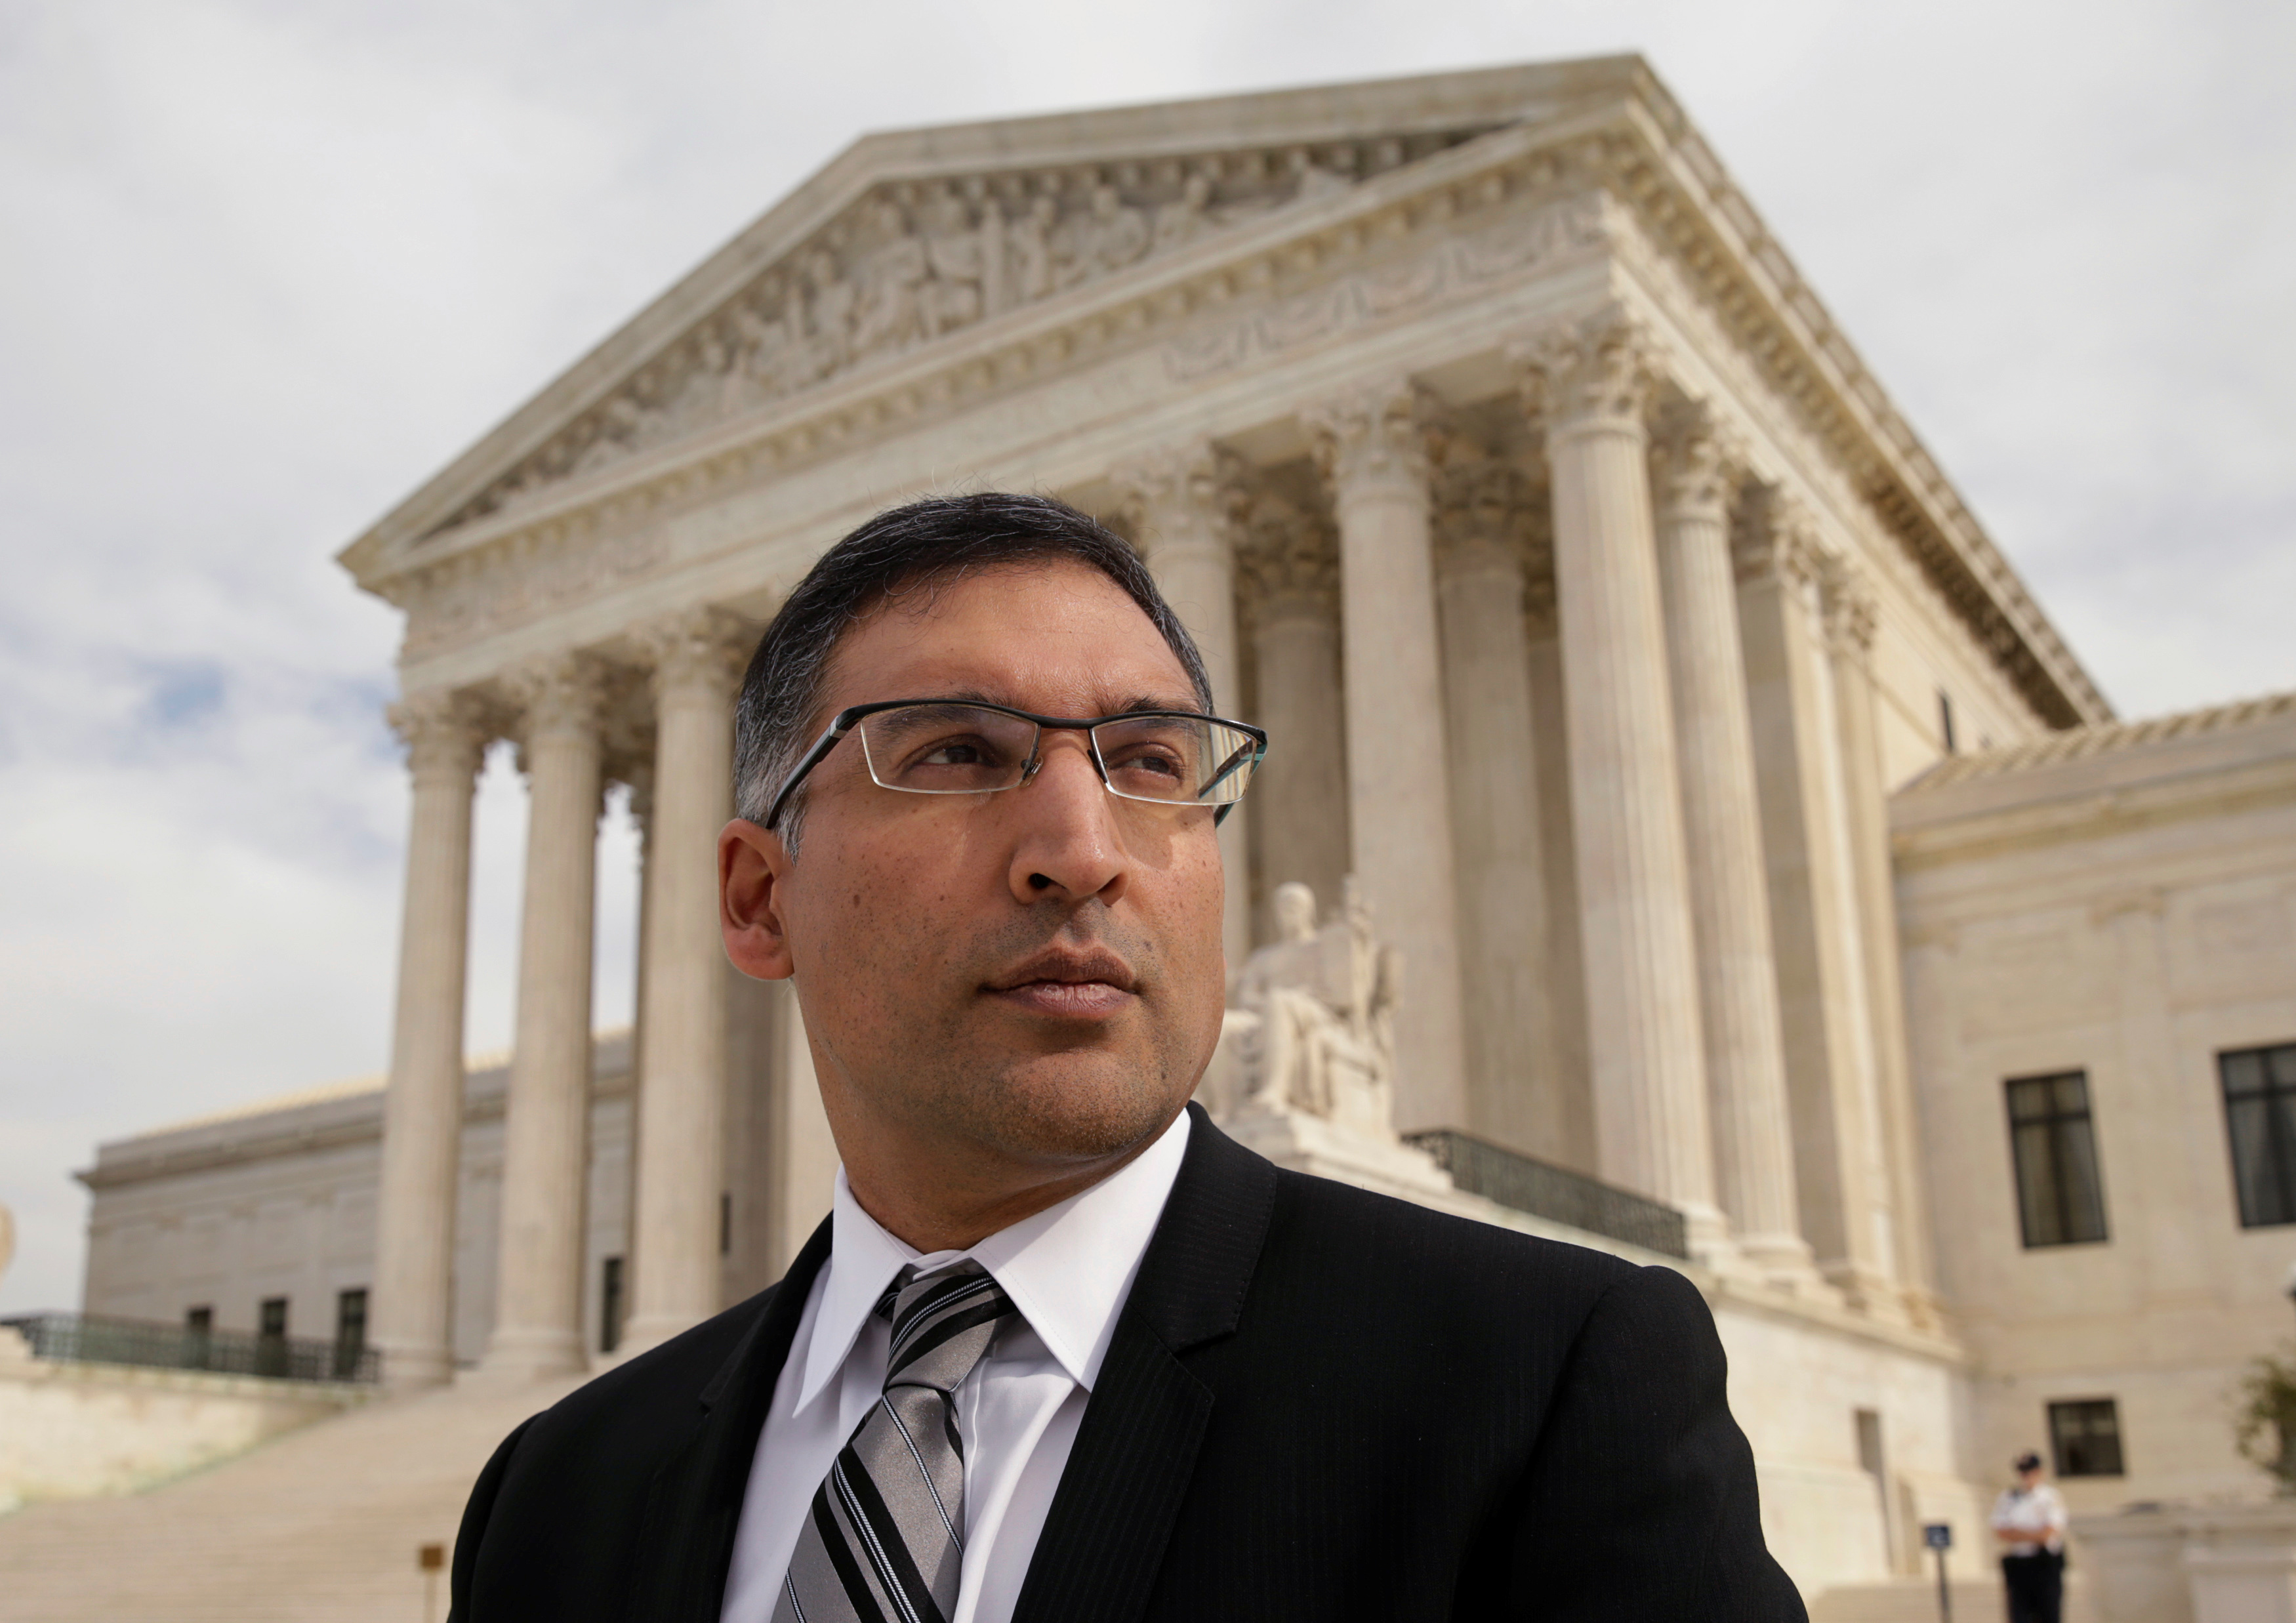 SCOTUS ace Neal Katyal gets another cameo with Billions appearance